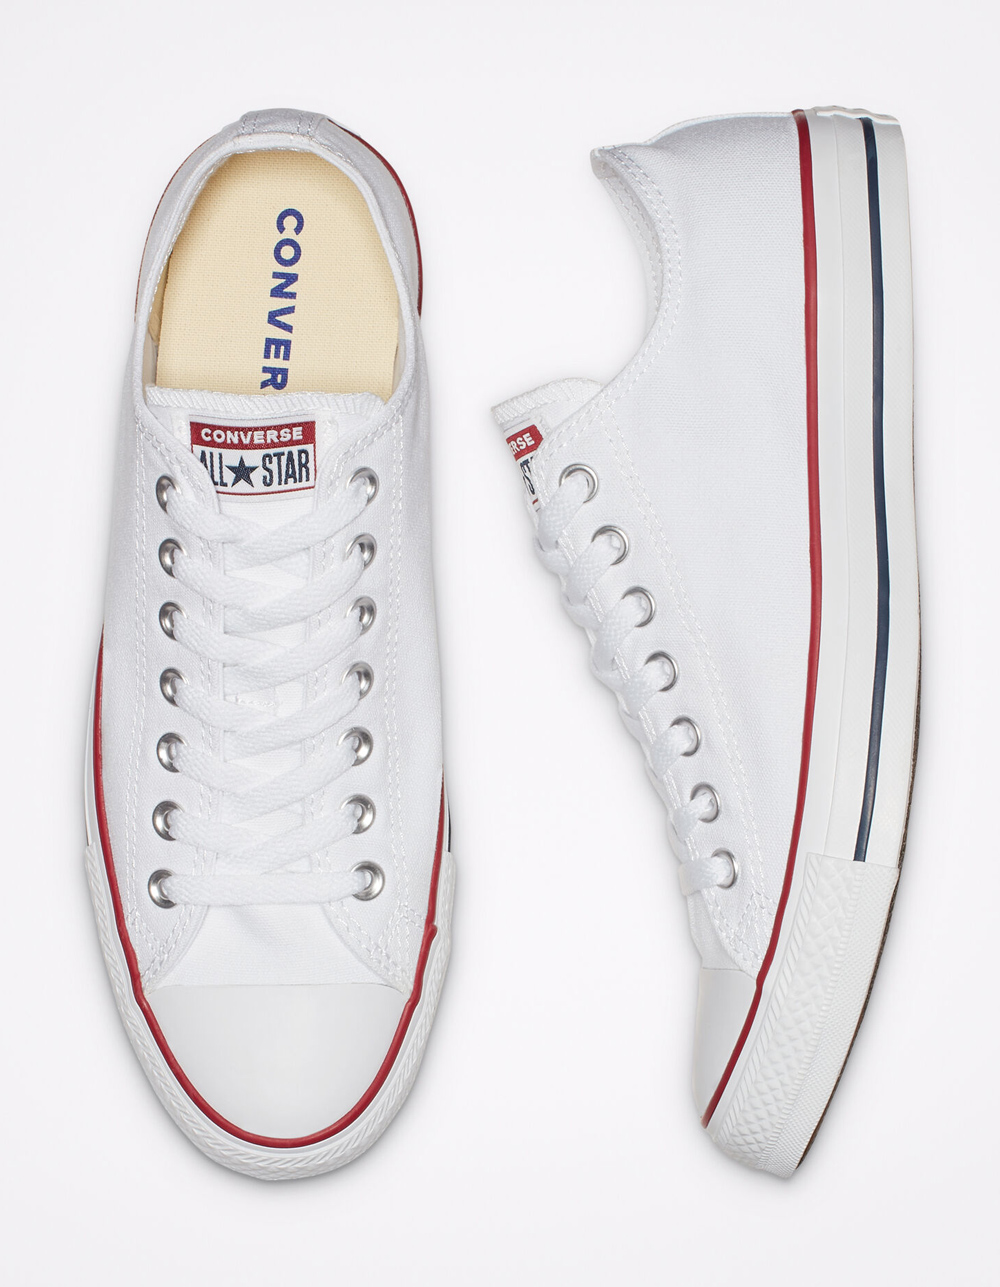 Converse Chuck Taylor All Star White Low | Tillys